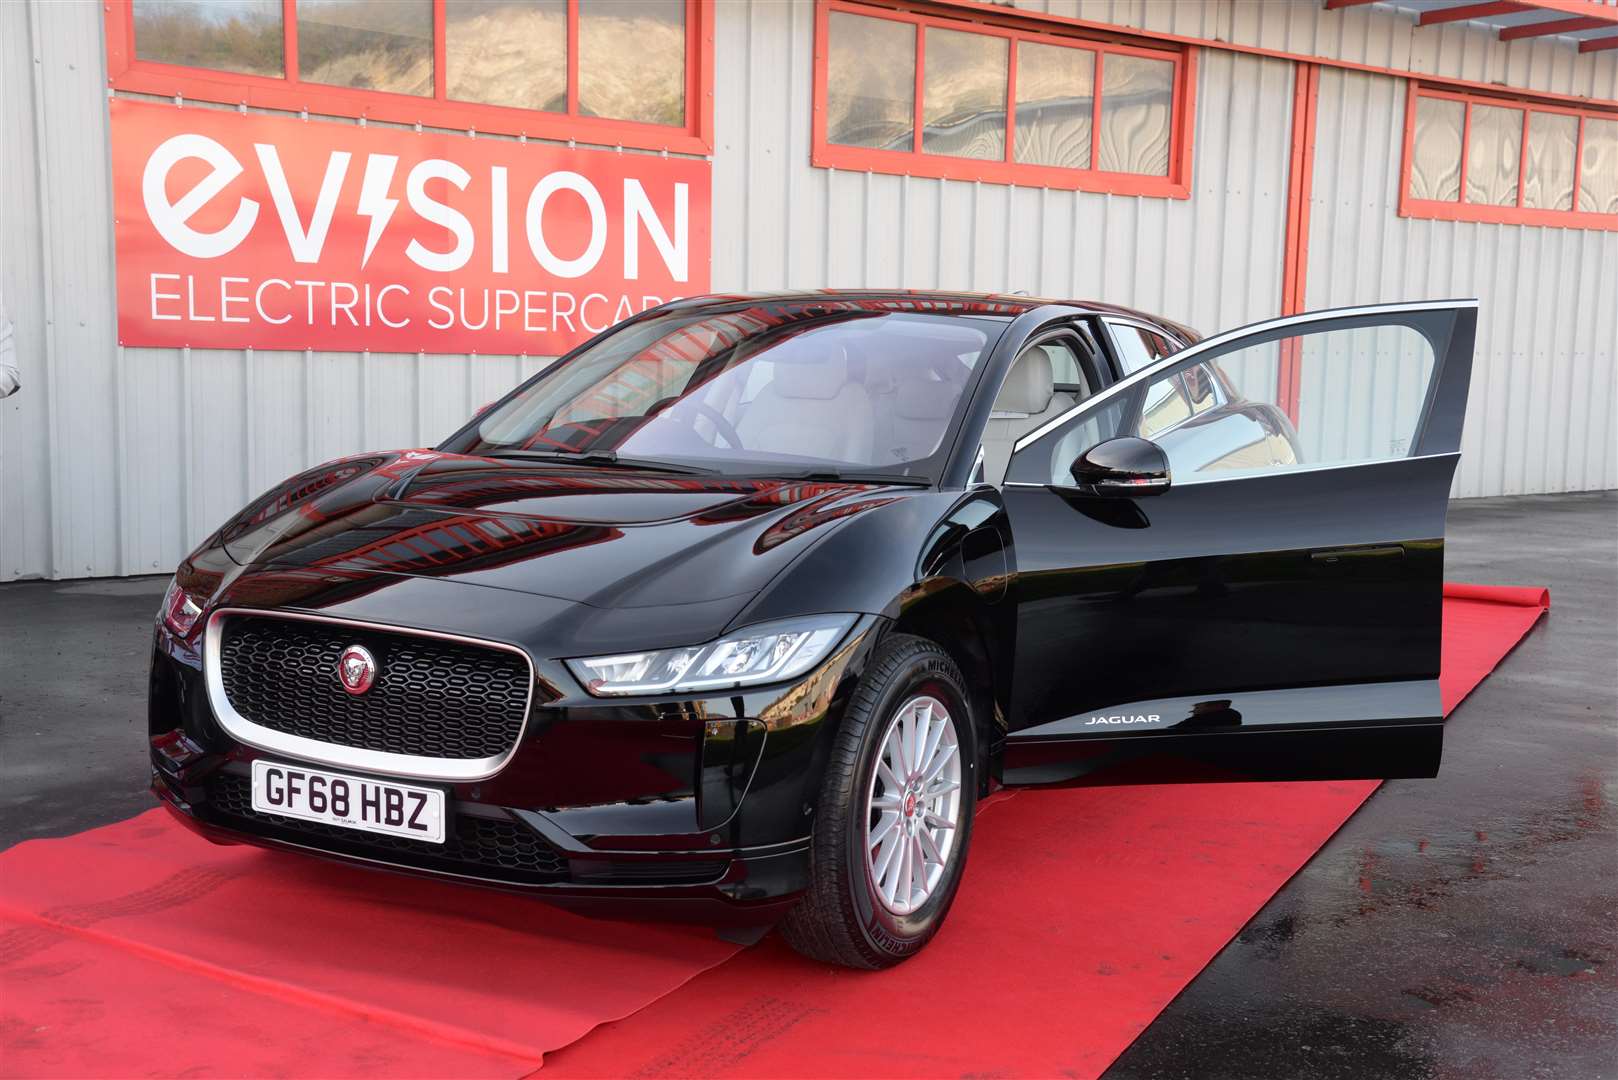 The Jaguar I-Pace Ecocar during the launch at Evision at the Whitewall Centre, Rochester on Wednesday. Picture: Chris Davey. (5421658)